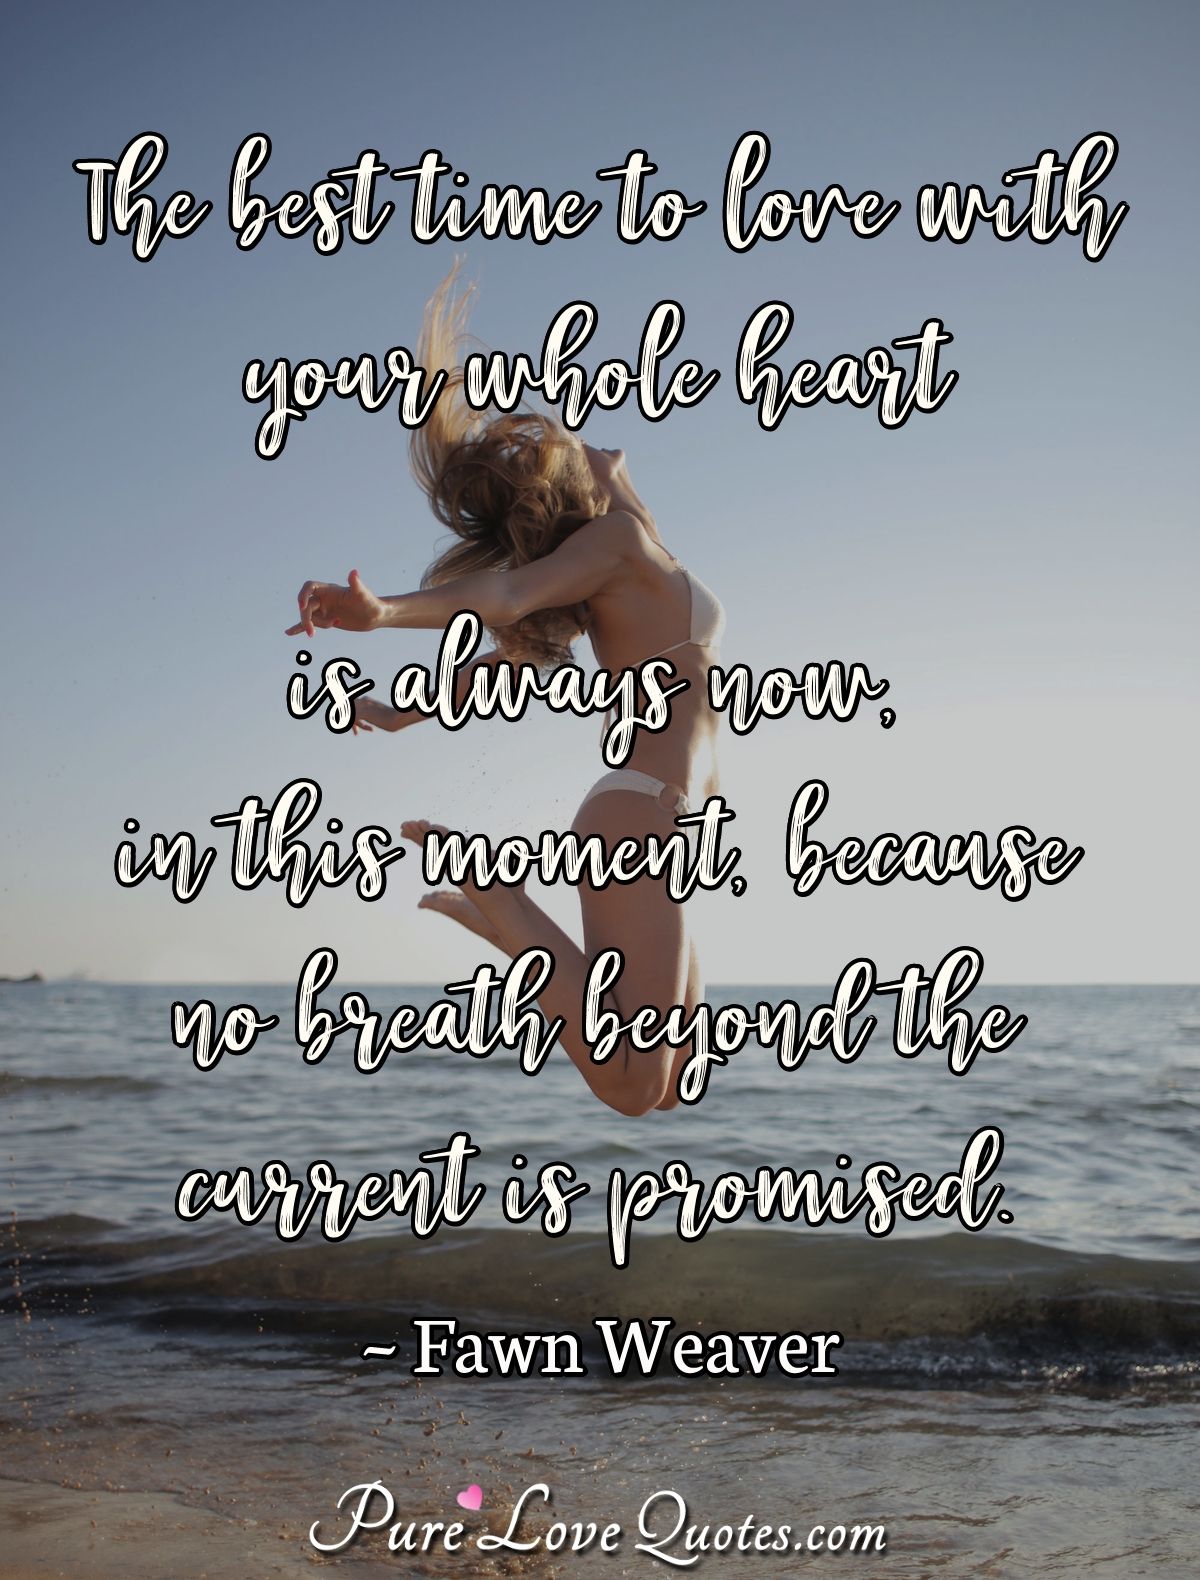 The best time to love with your whole heart is always now, in this moment, because no breath beyond the current is promised. - Fawn Weaver